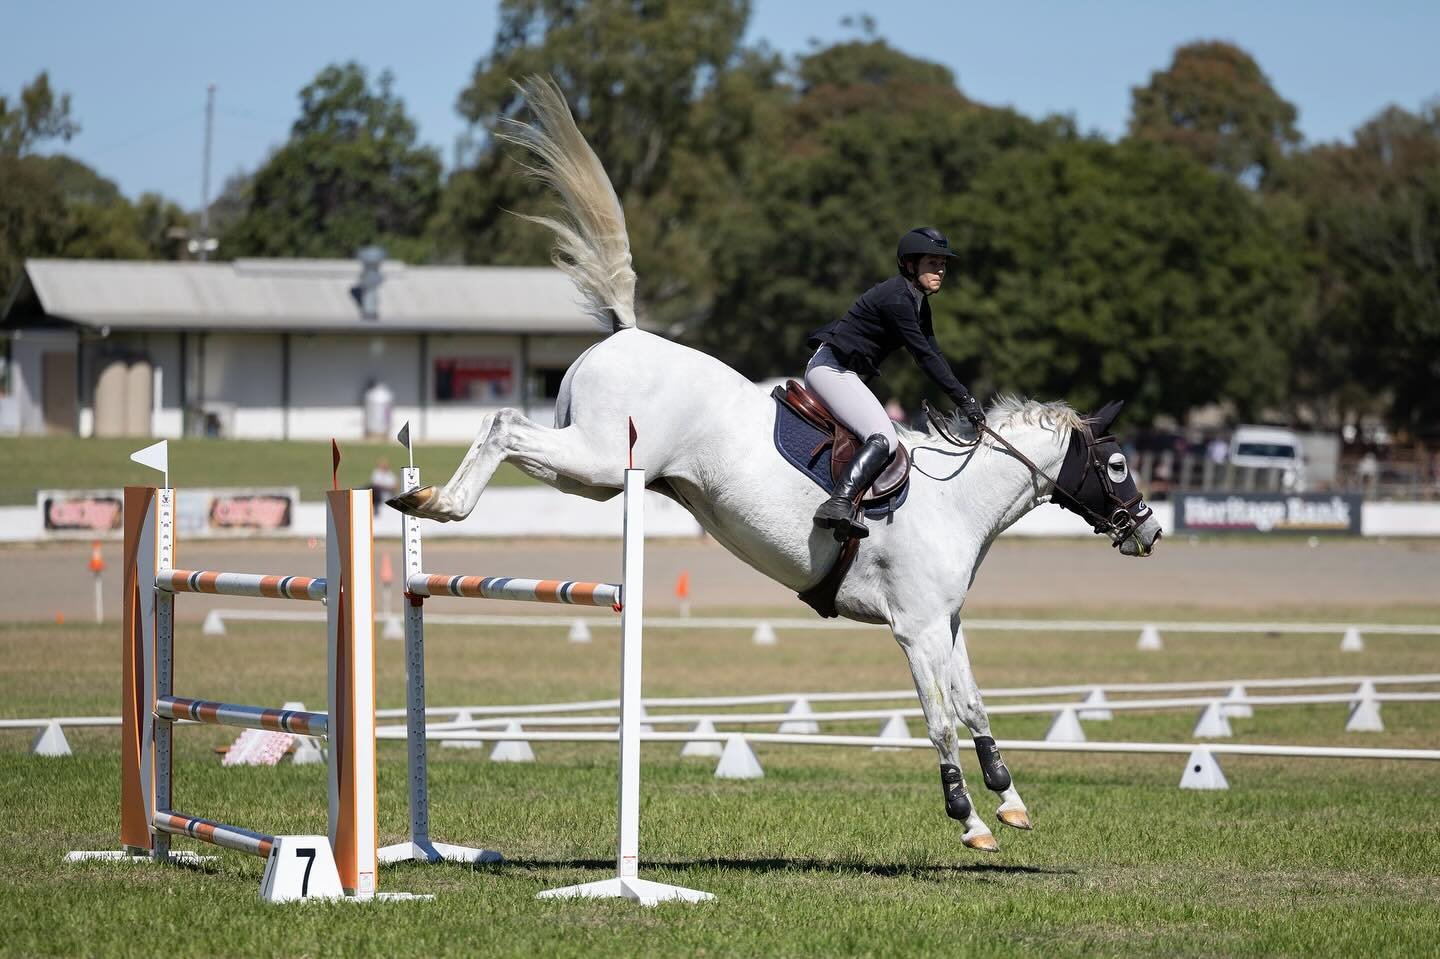 bend &amp; snap! 💥
Christabella D in the 140cm @ Toowoomba Royal